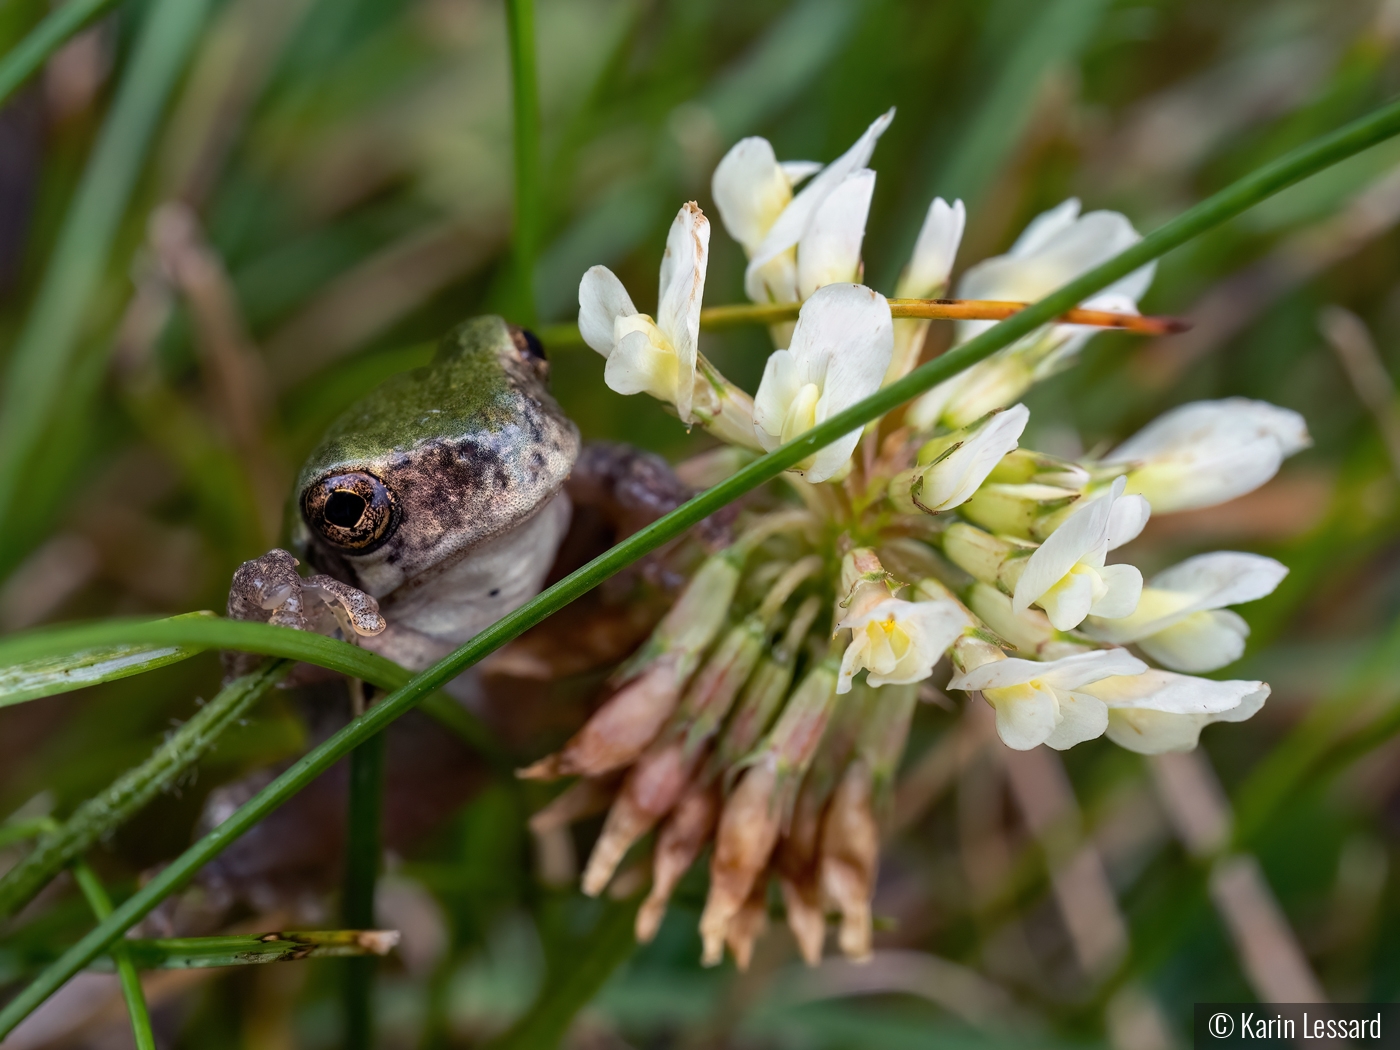 Mr. Frog and the Clover Flower by Karin Lessard